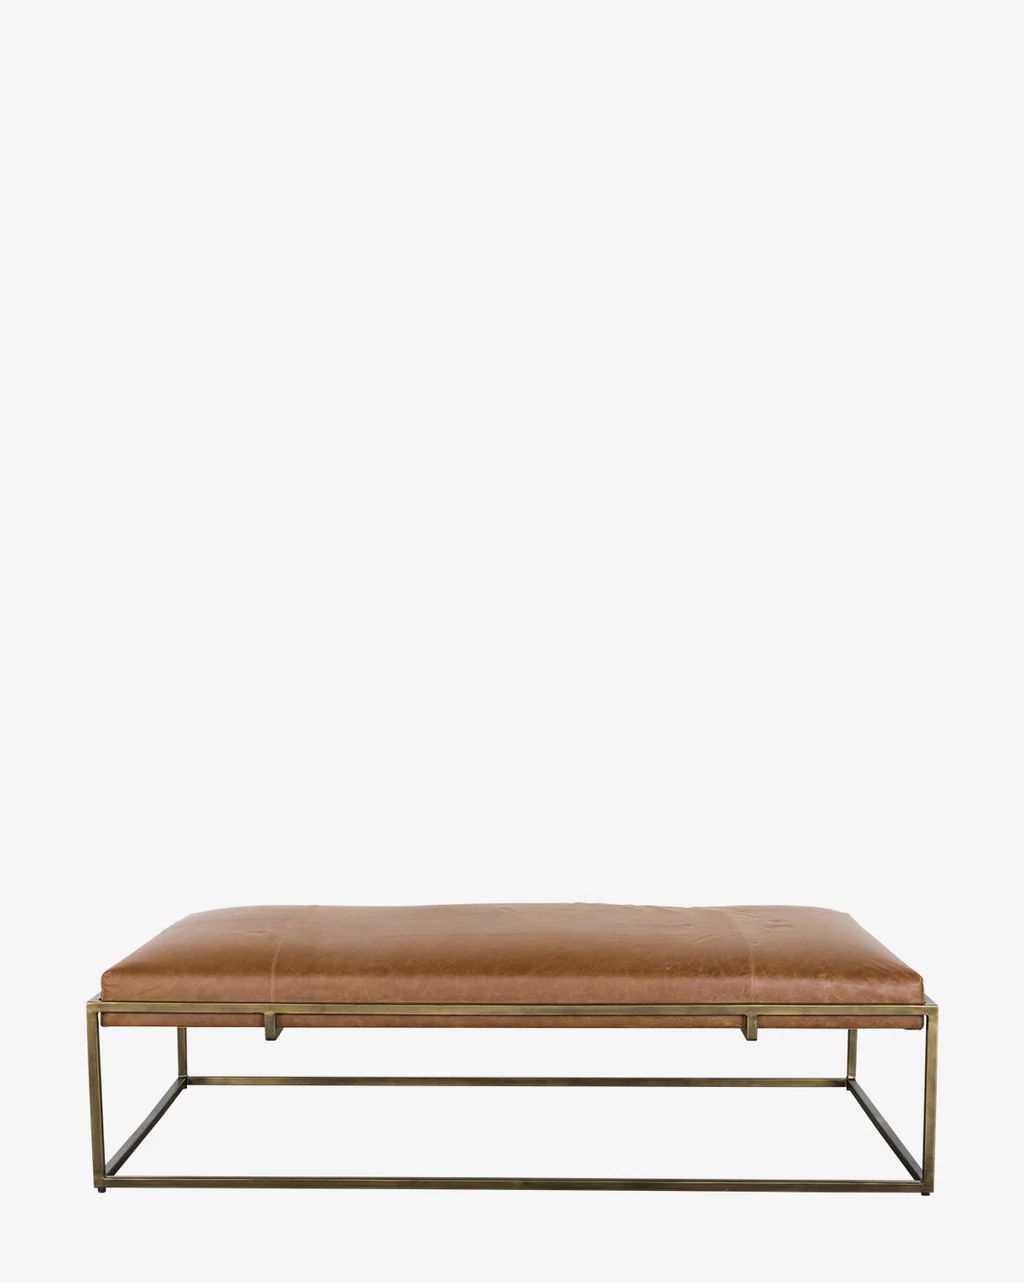 Harlow Leather Bench | McGee & Co.